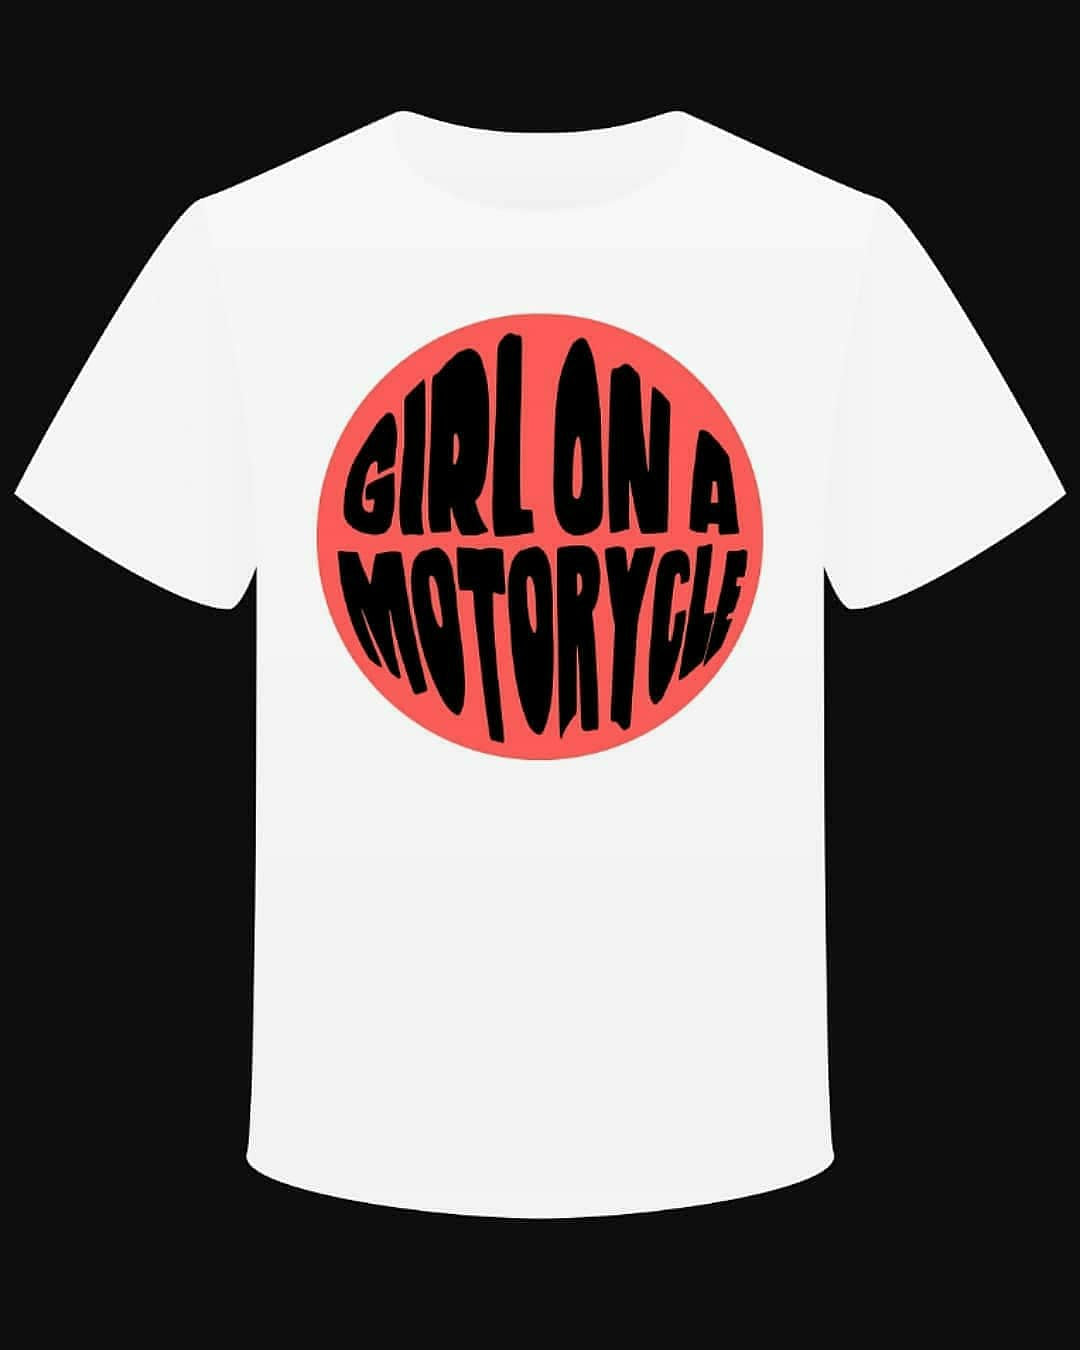 T-shirt "Girl on a Motorcycle" Version Rose